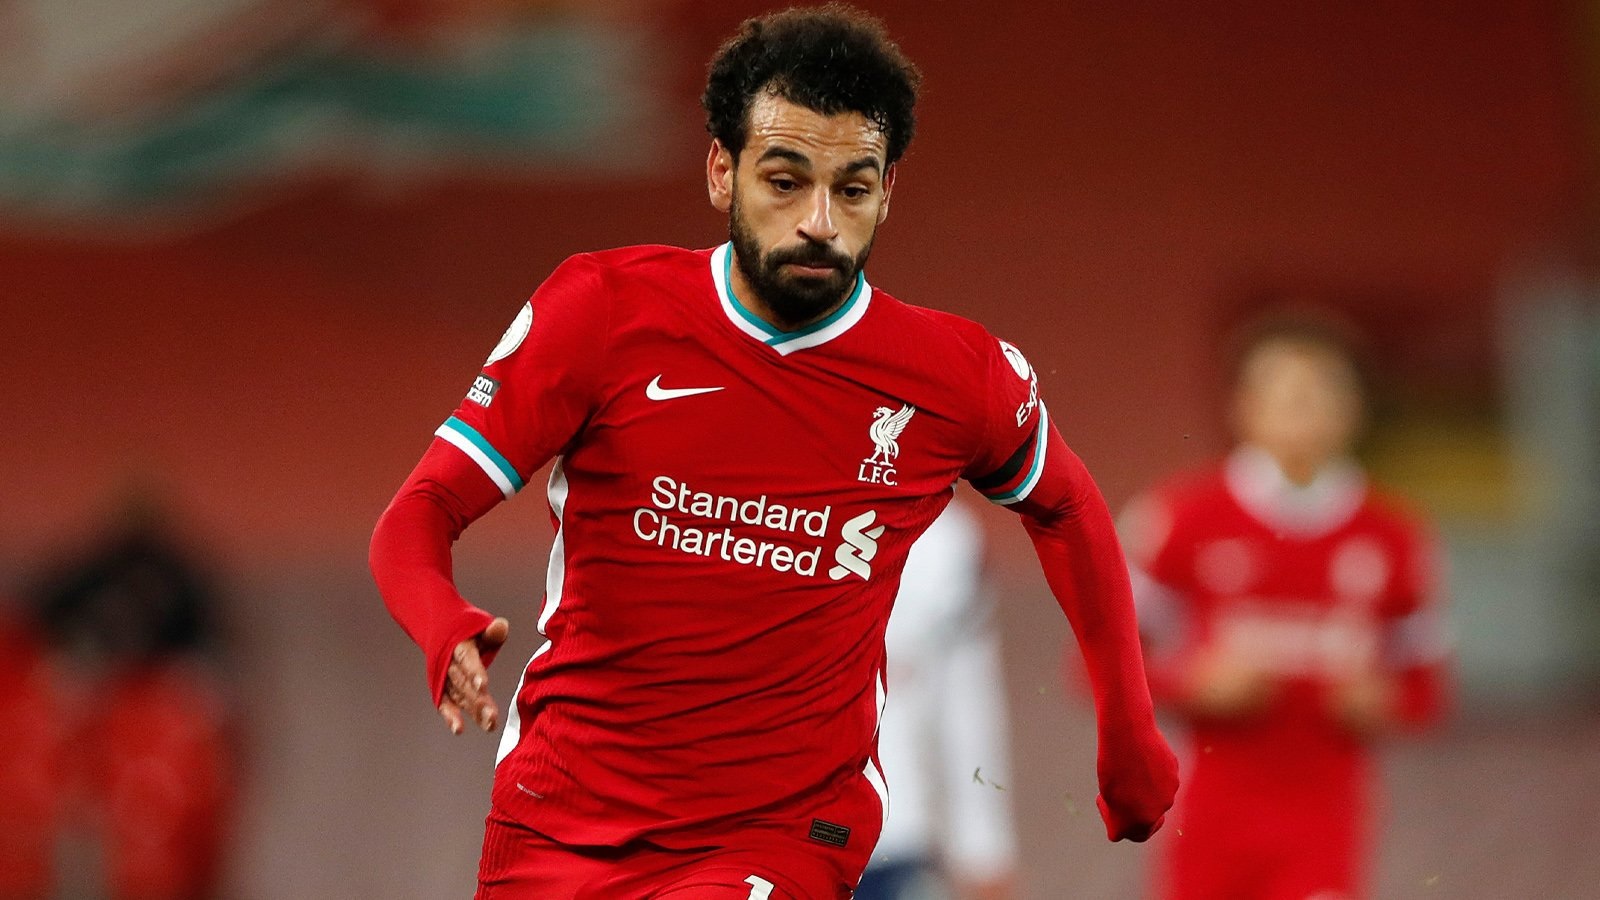 Mo Salah says nobody at LFC is talking about a new contract, but he wants to win more titles at Anfield